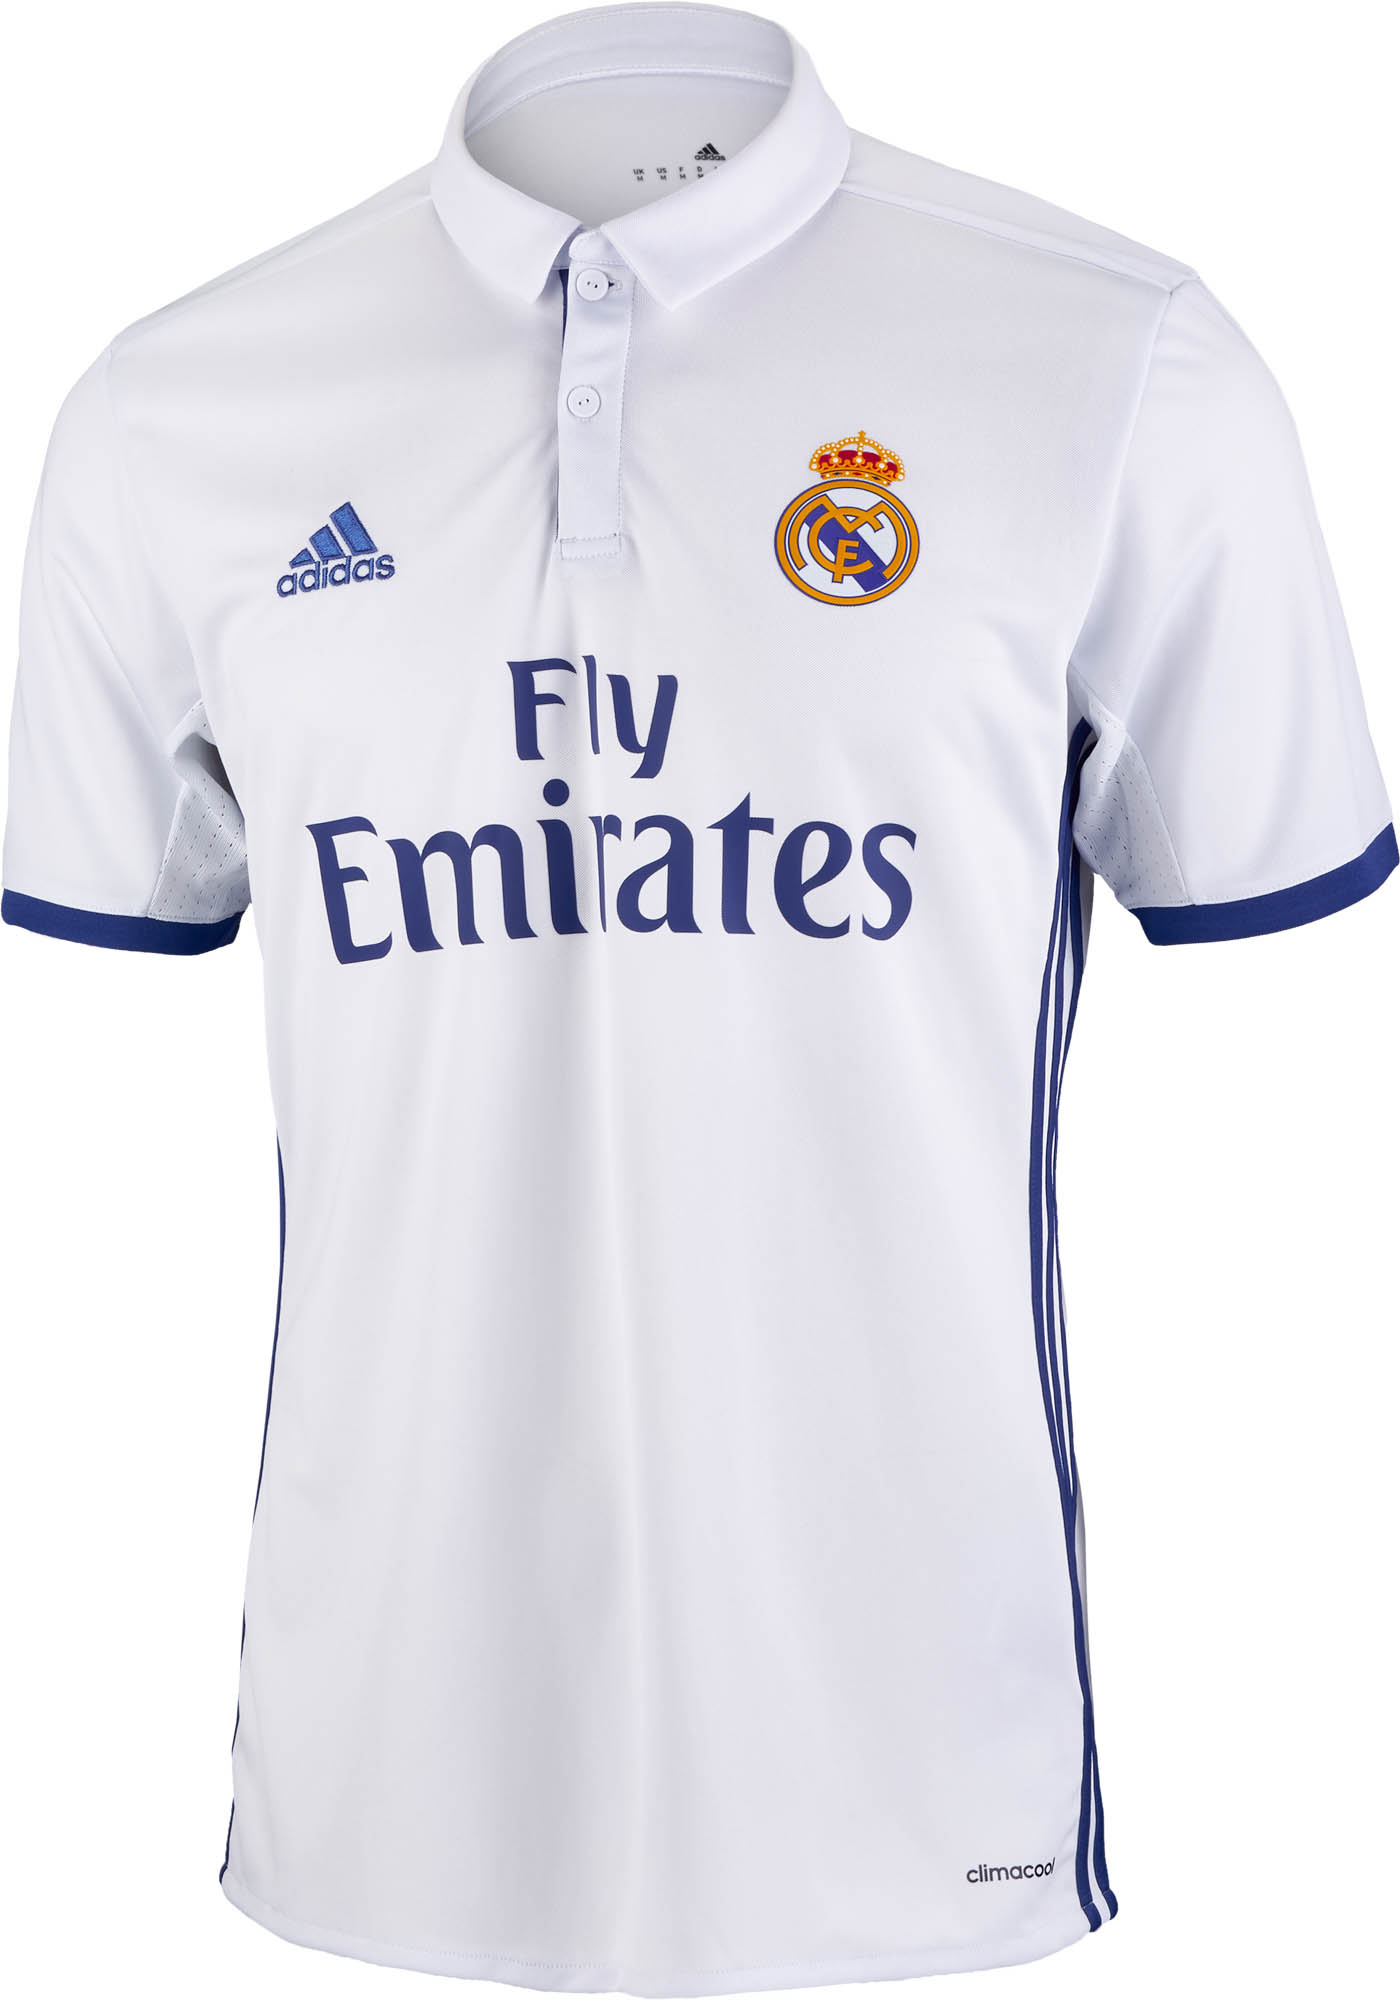 dier Egypte passend adidas Real Madrid Home Jersey 2016-17 - Soccer Master